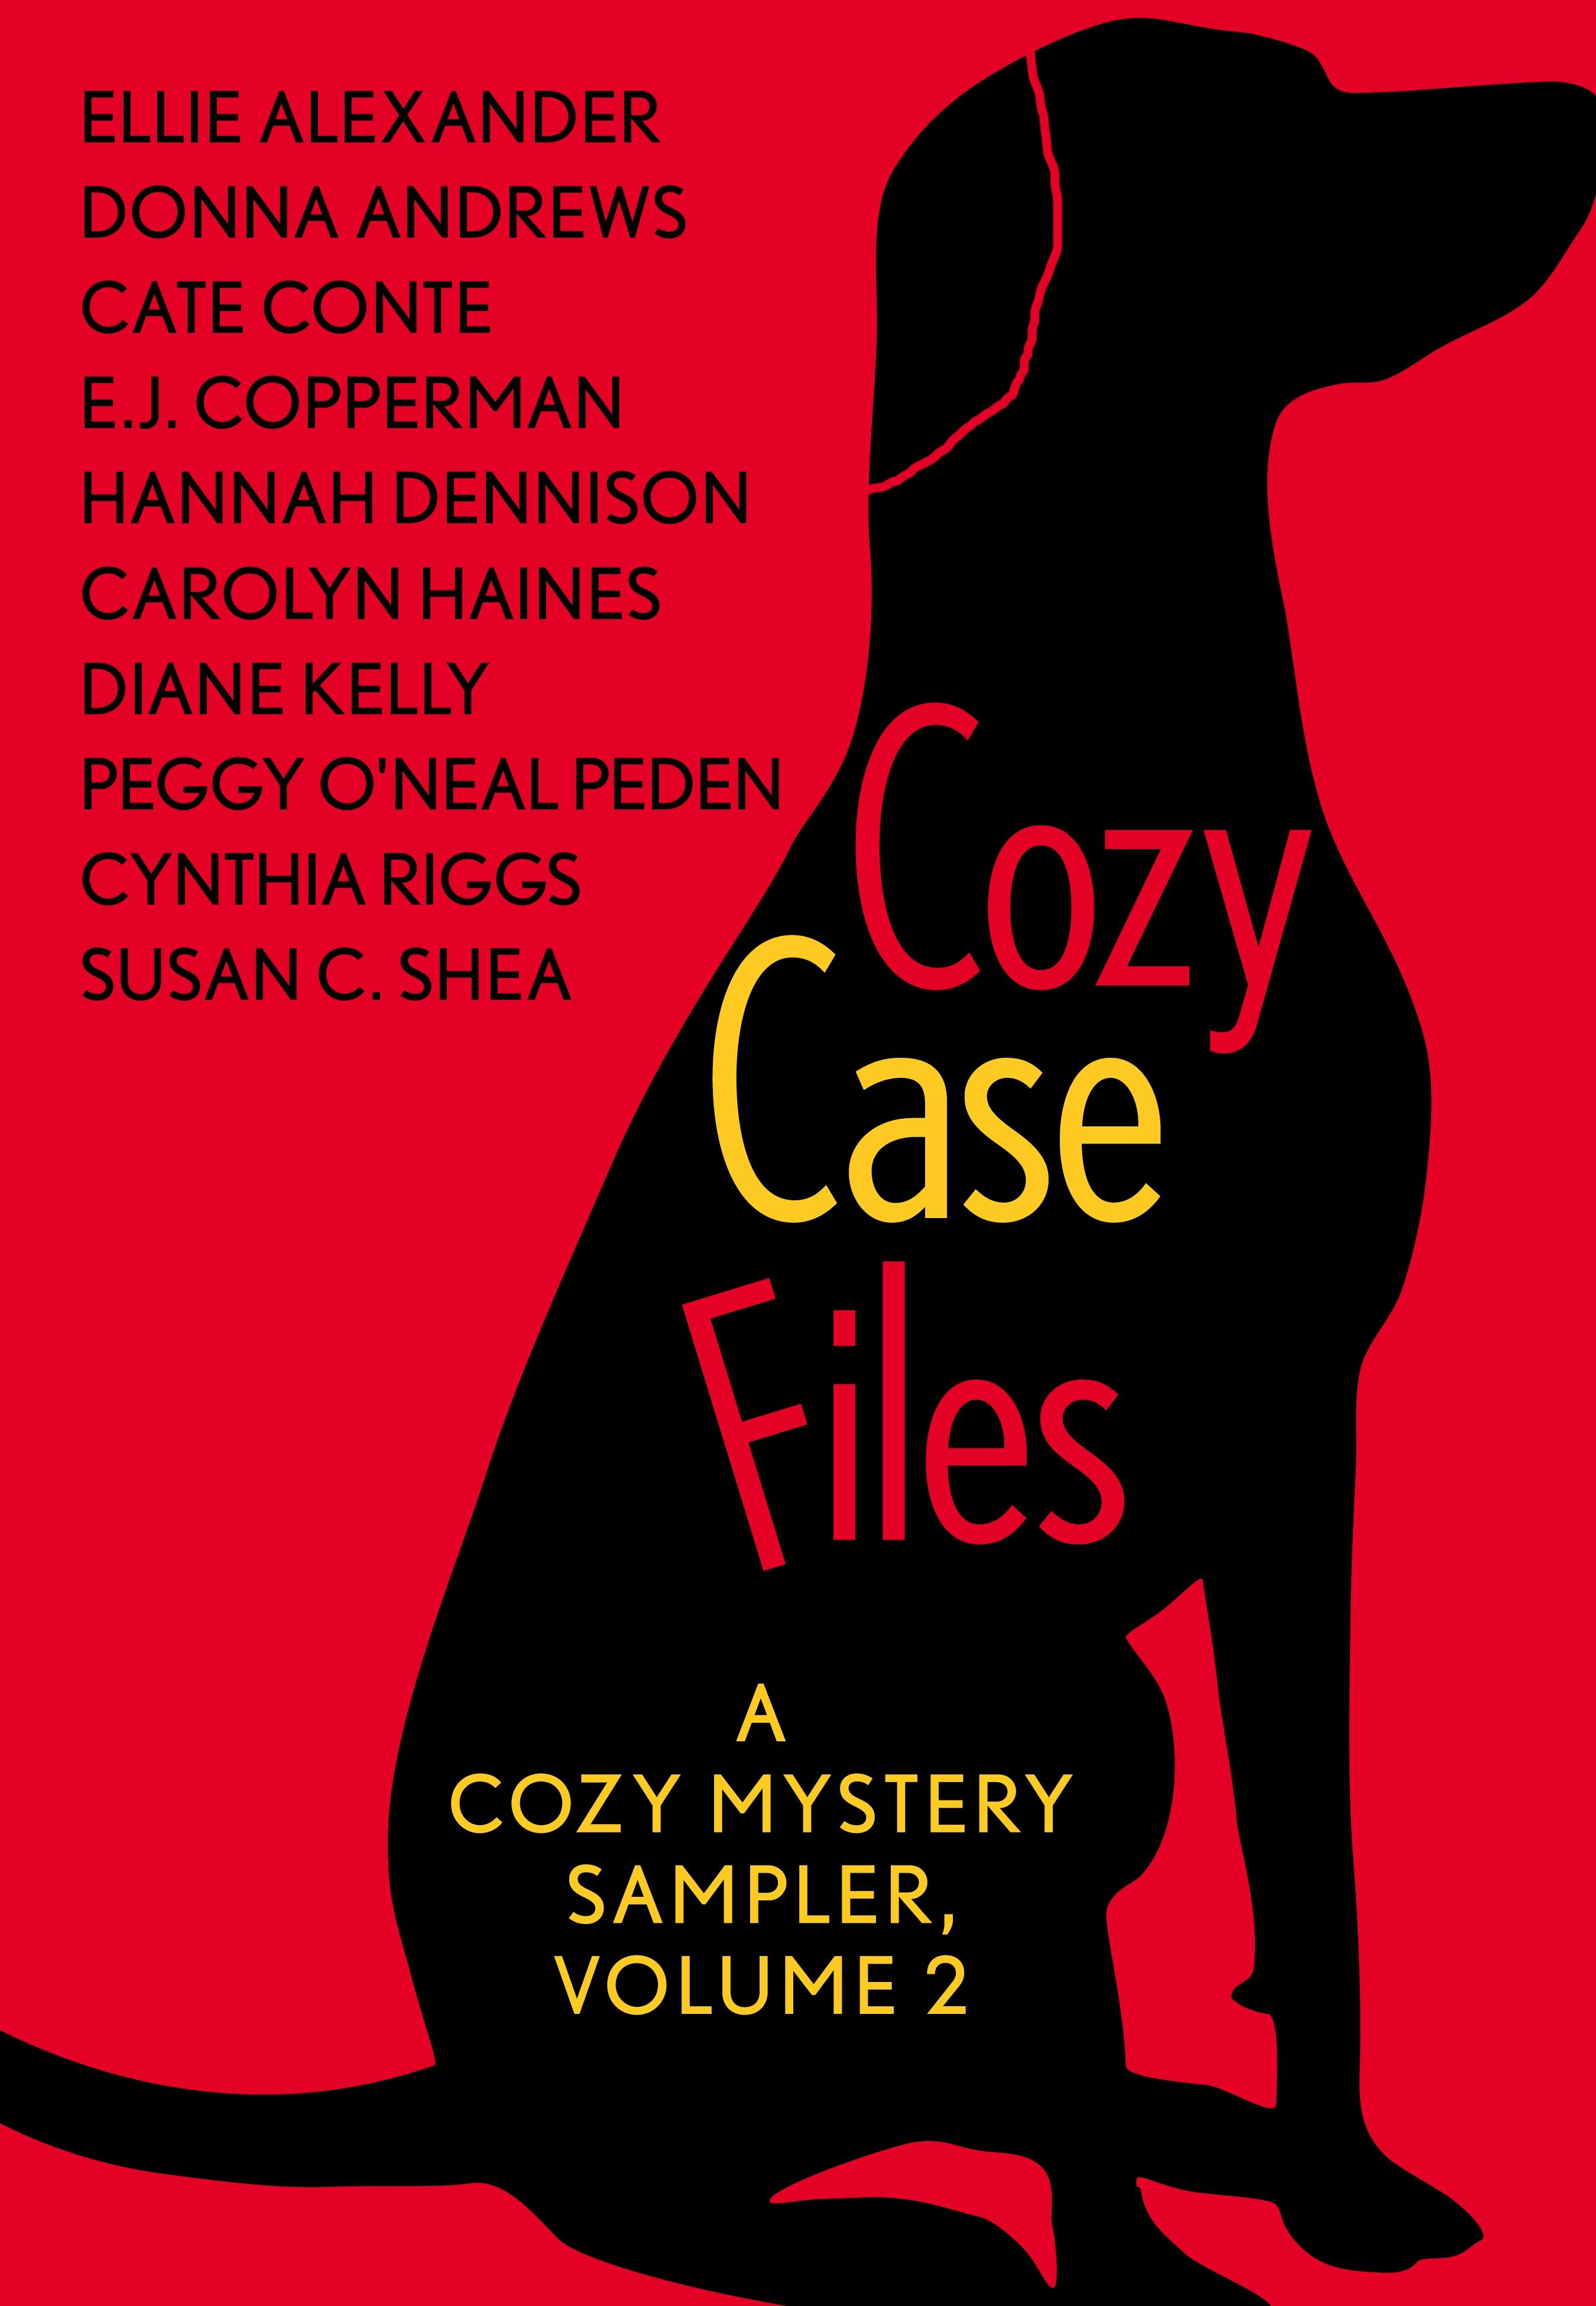 Image of Cozy Case Files: A Cozy Mystery Sampler, Volume 2